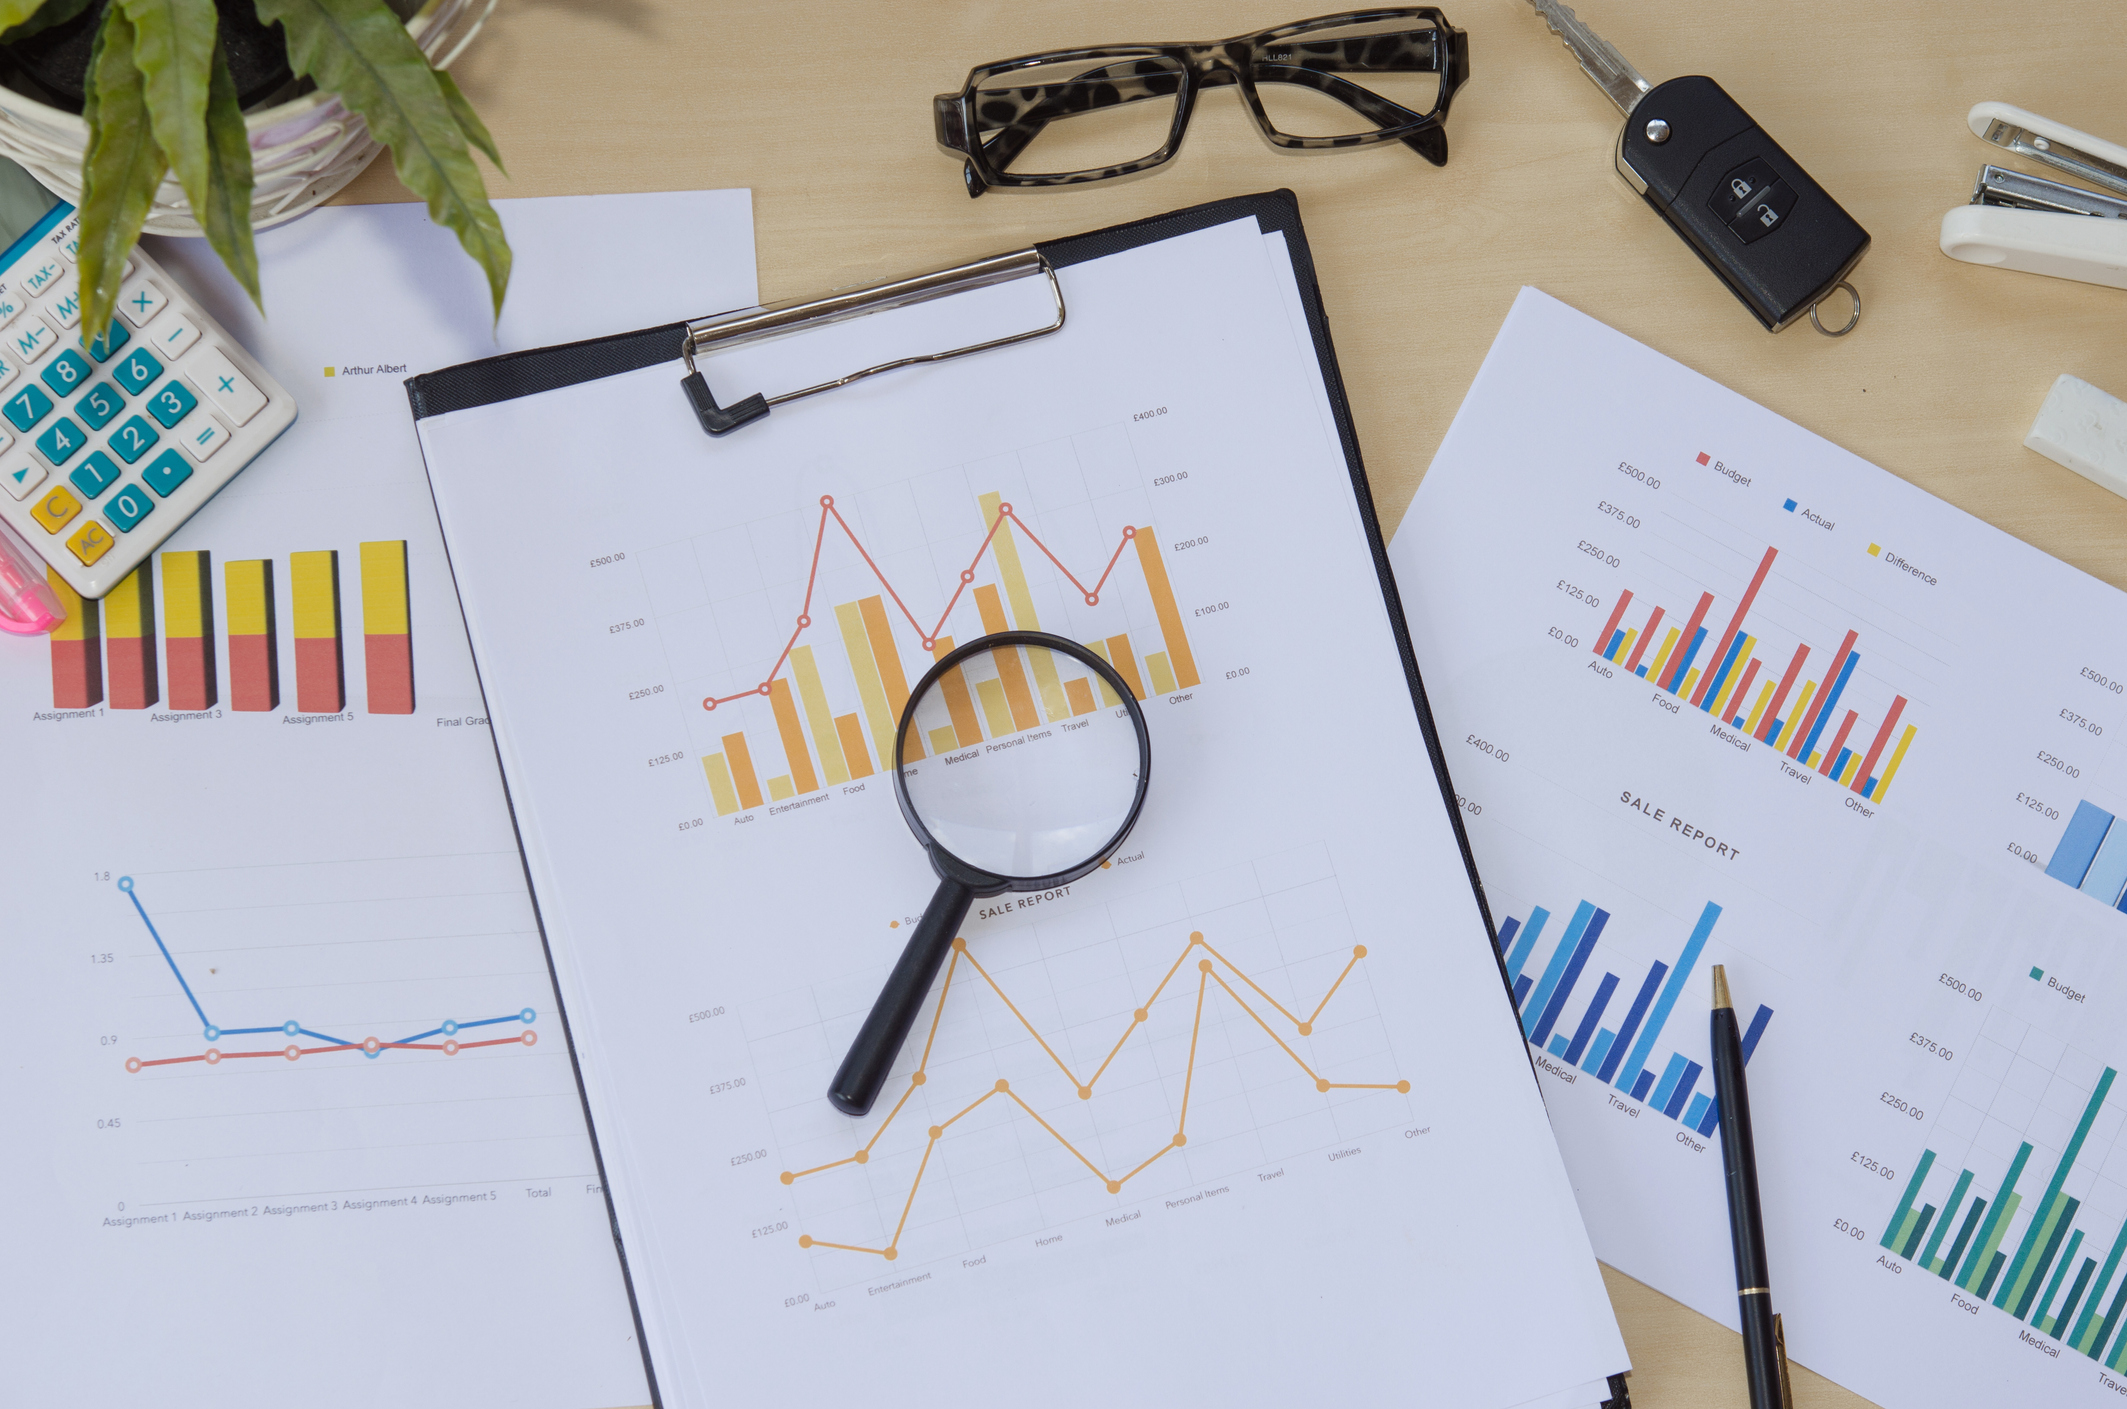 A stock image of graphs and charts